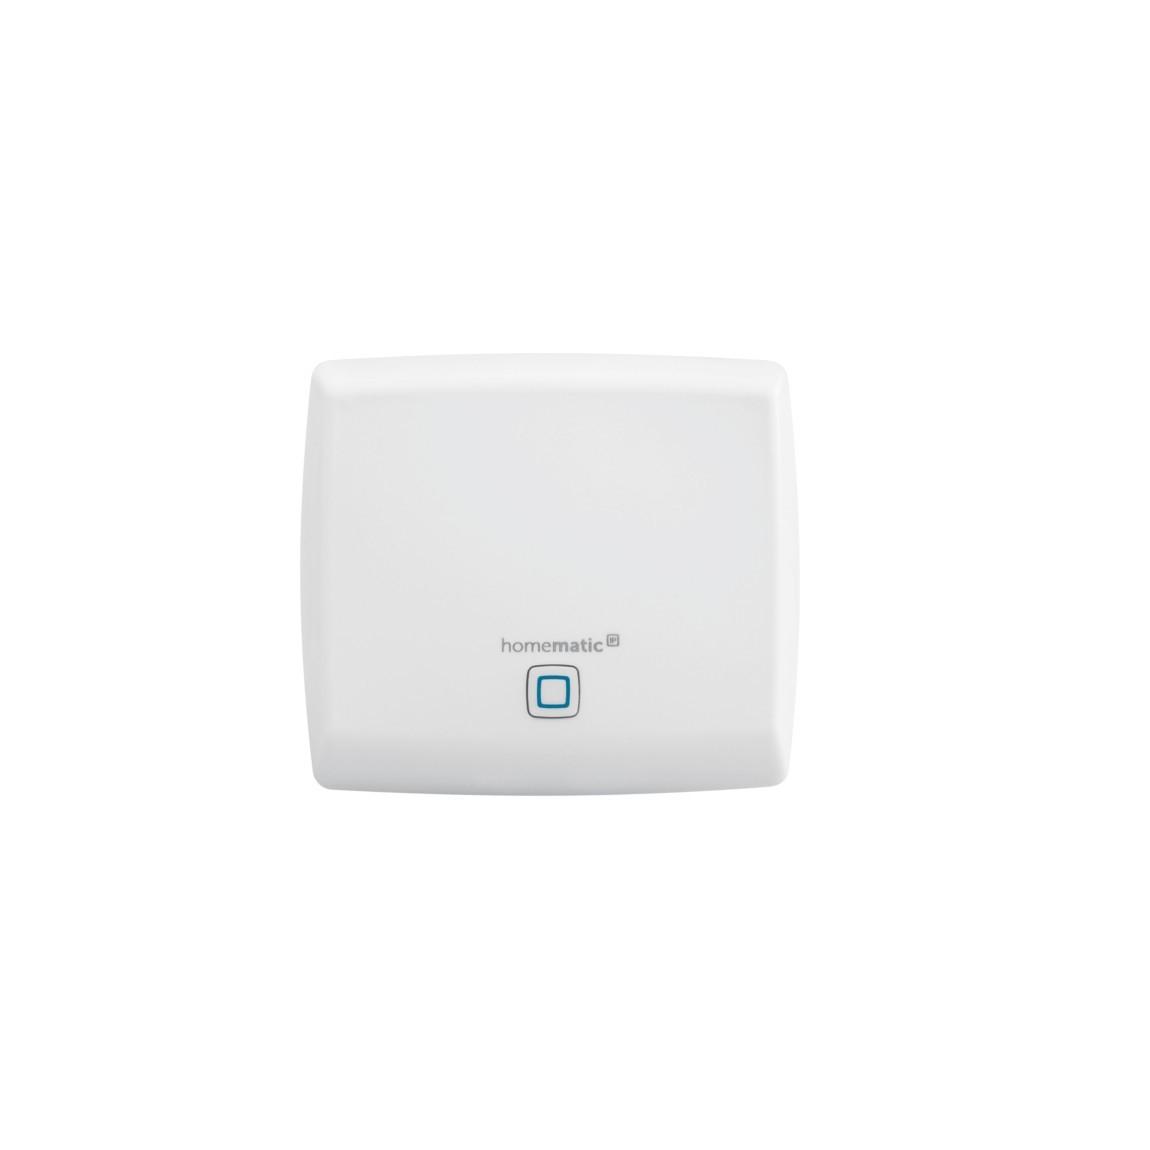 HomeMatic IP Access Point front 